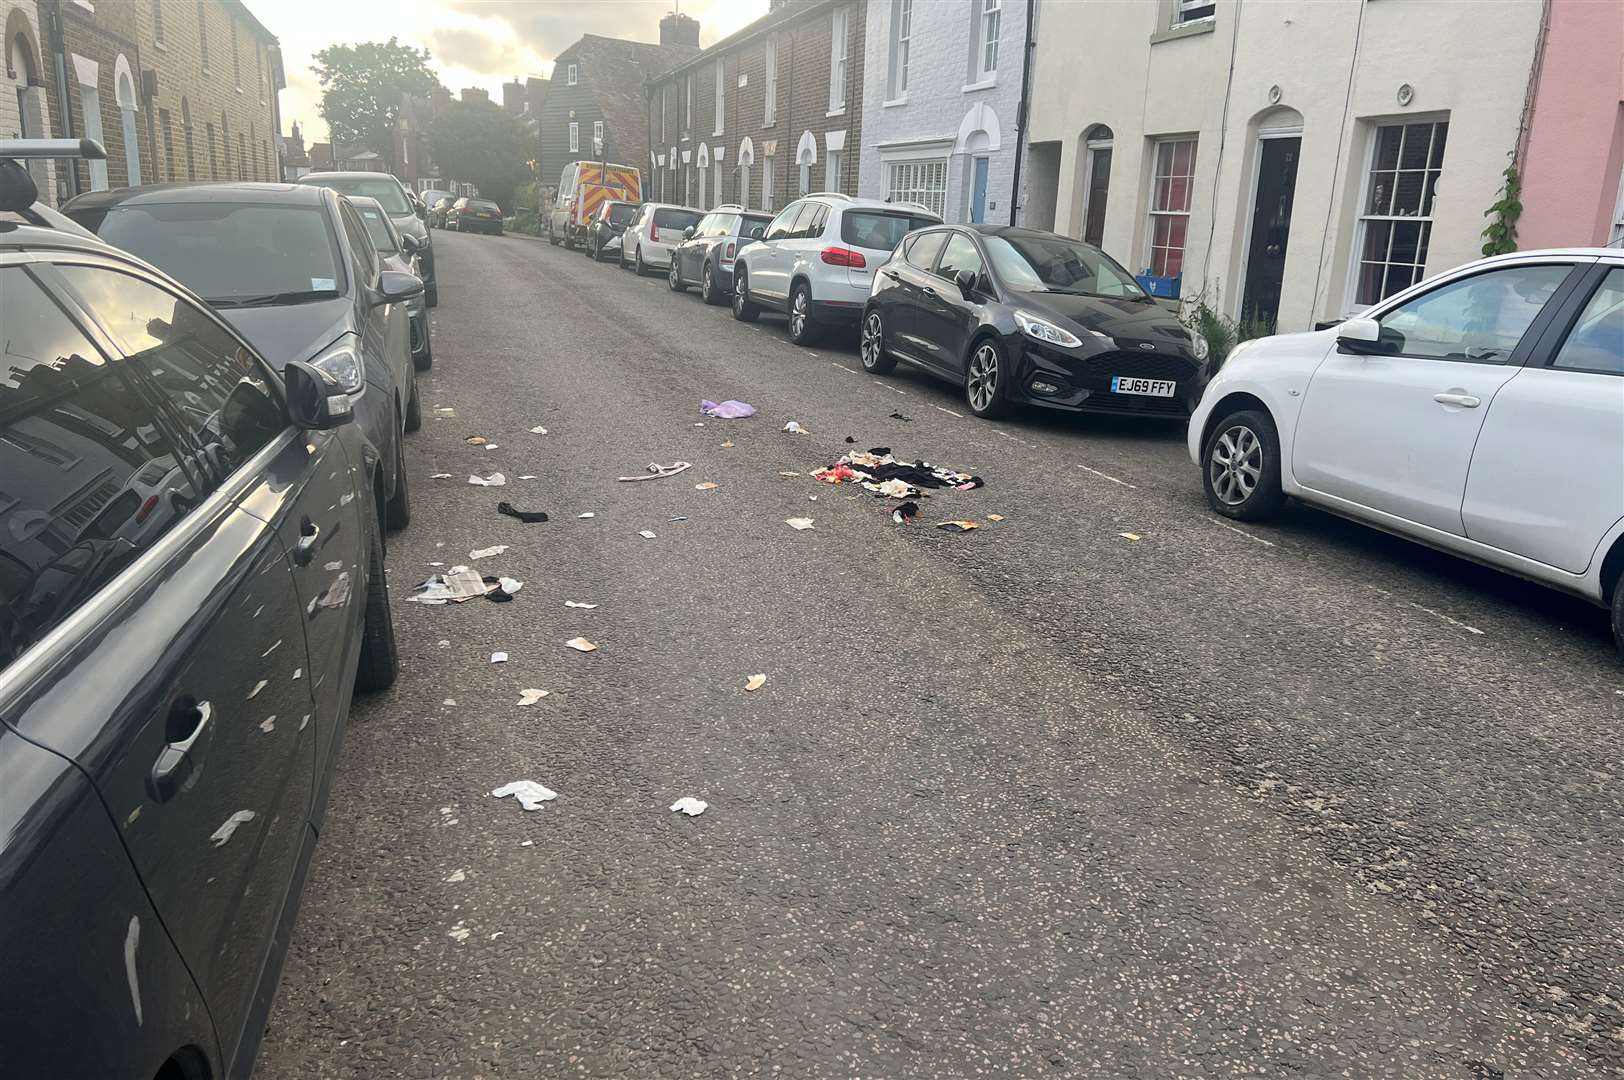 The unpleasant sight of litter in Faversham this week